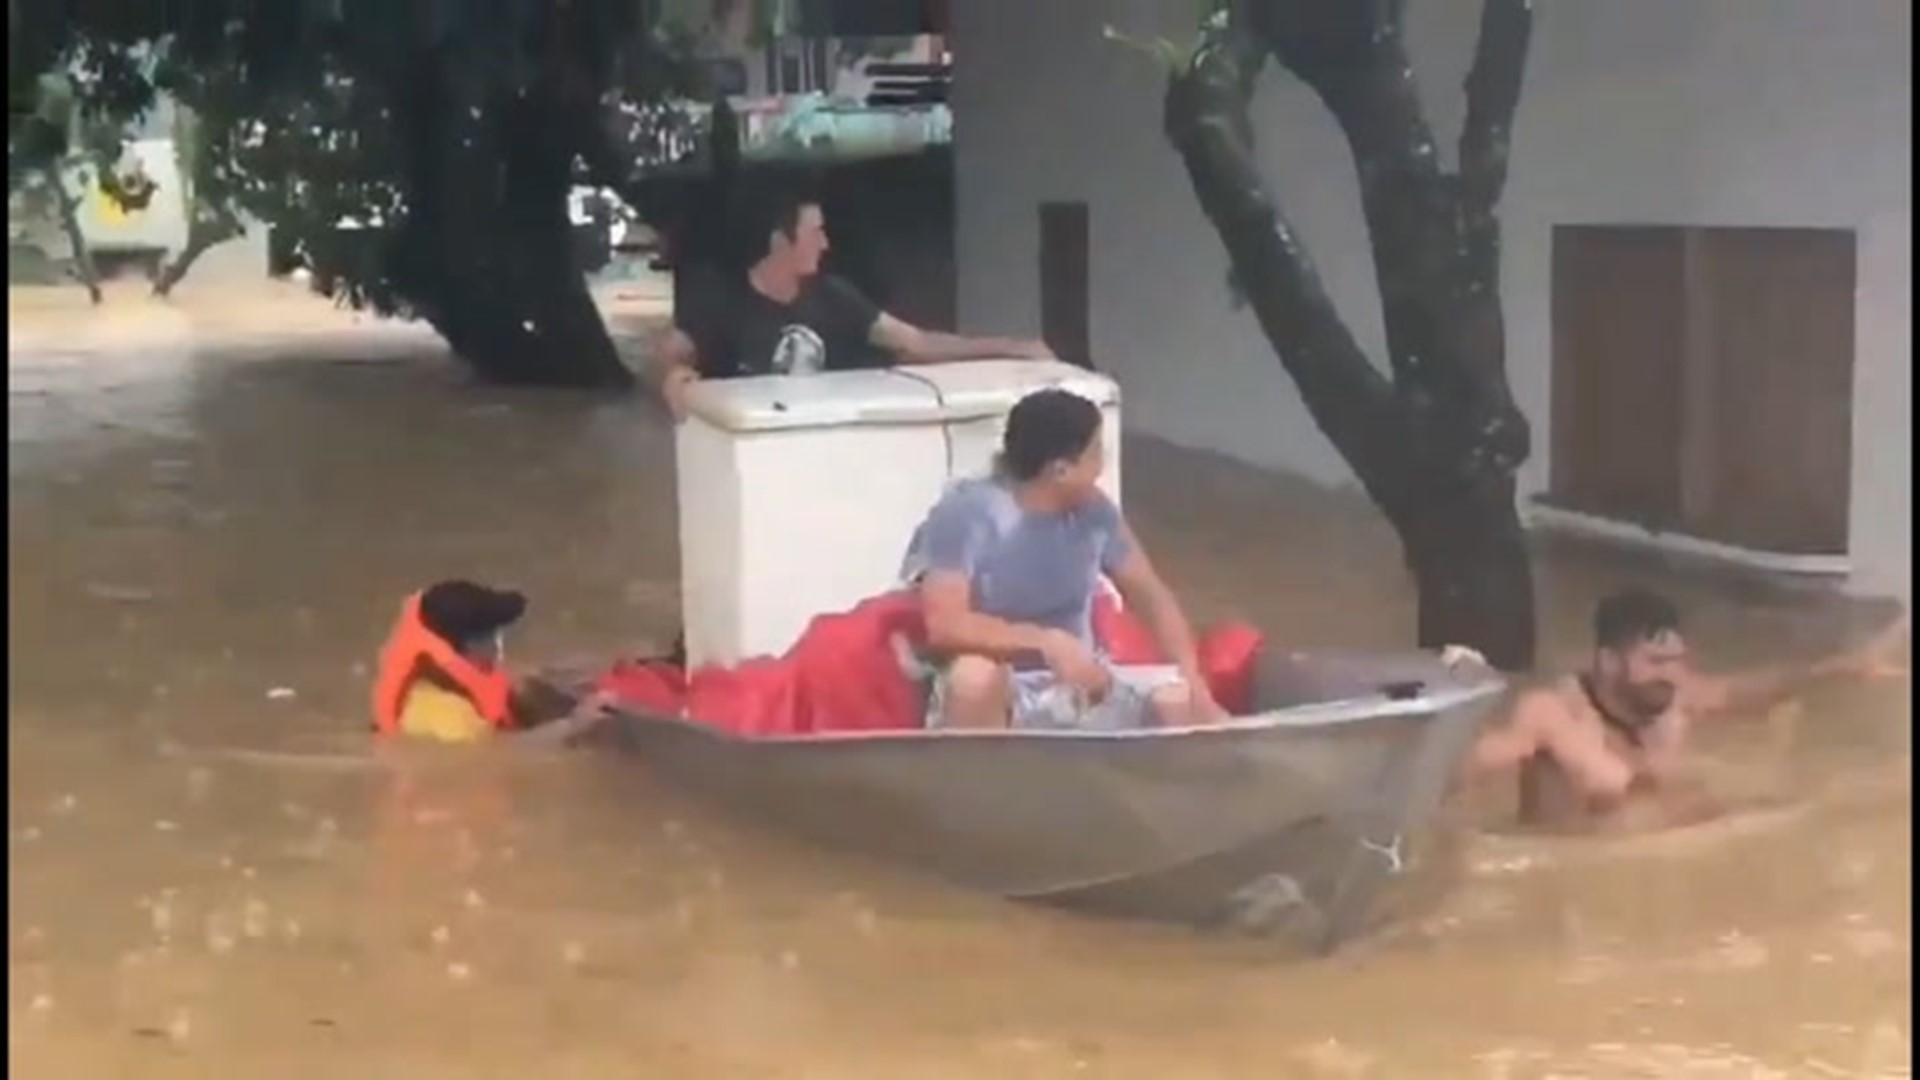 Search and rescue efforts continued in the Sula Valley, which includes cities such as San Pedro Sula, Choloma and Puerto Cortés, on Nov. 23 as the Fire Department of Honduras handled flooding in the area for the fourth time.